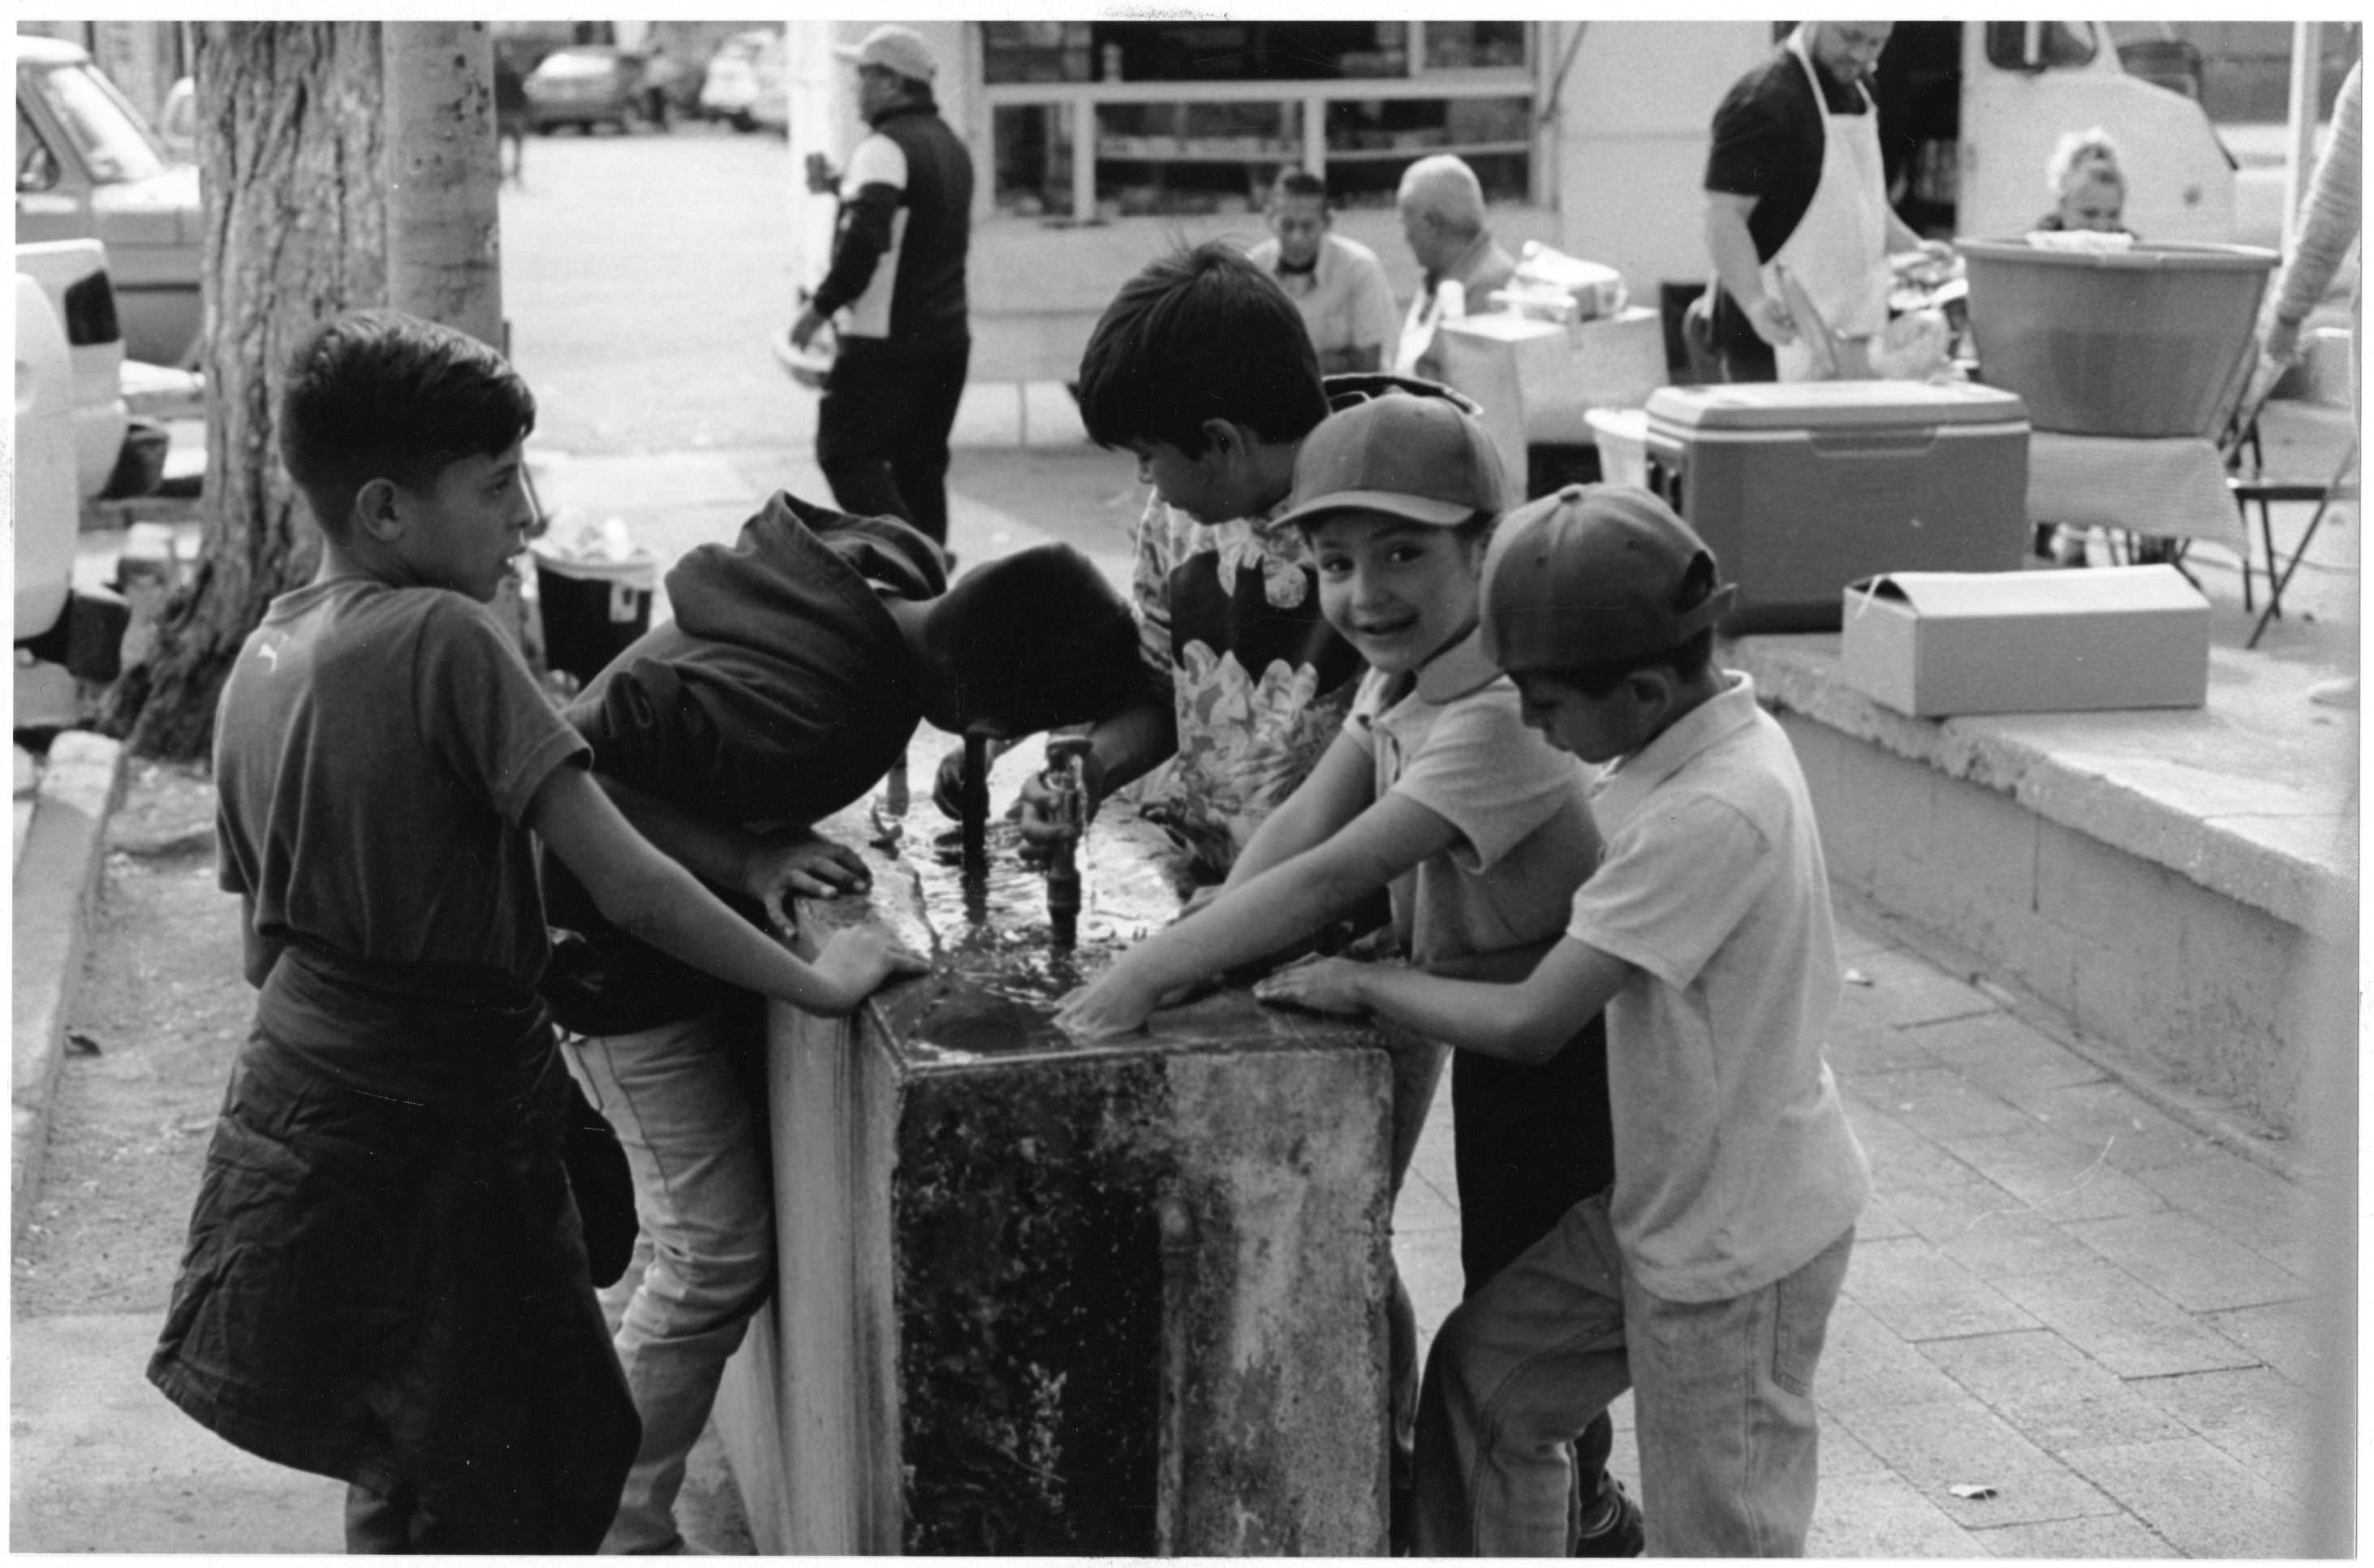 A black and white photograph of 5 kids drinking from a water fountain